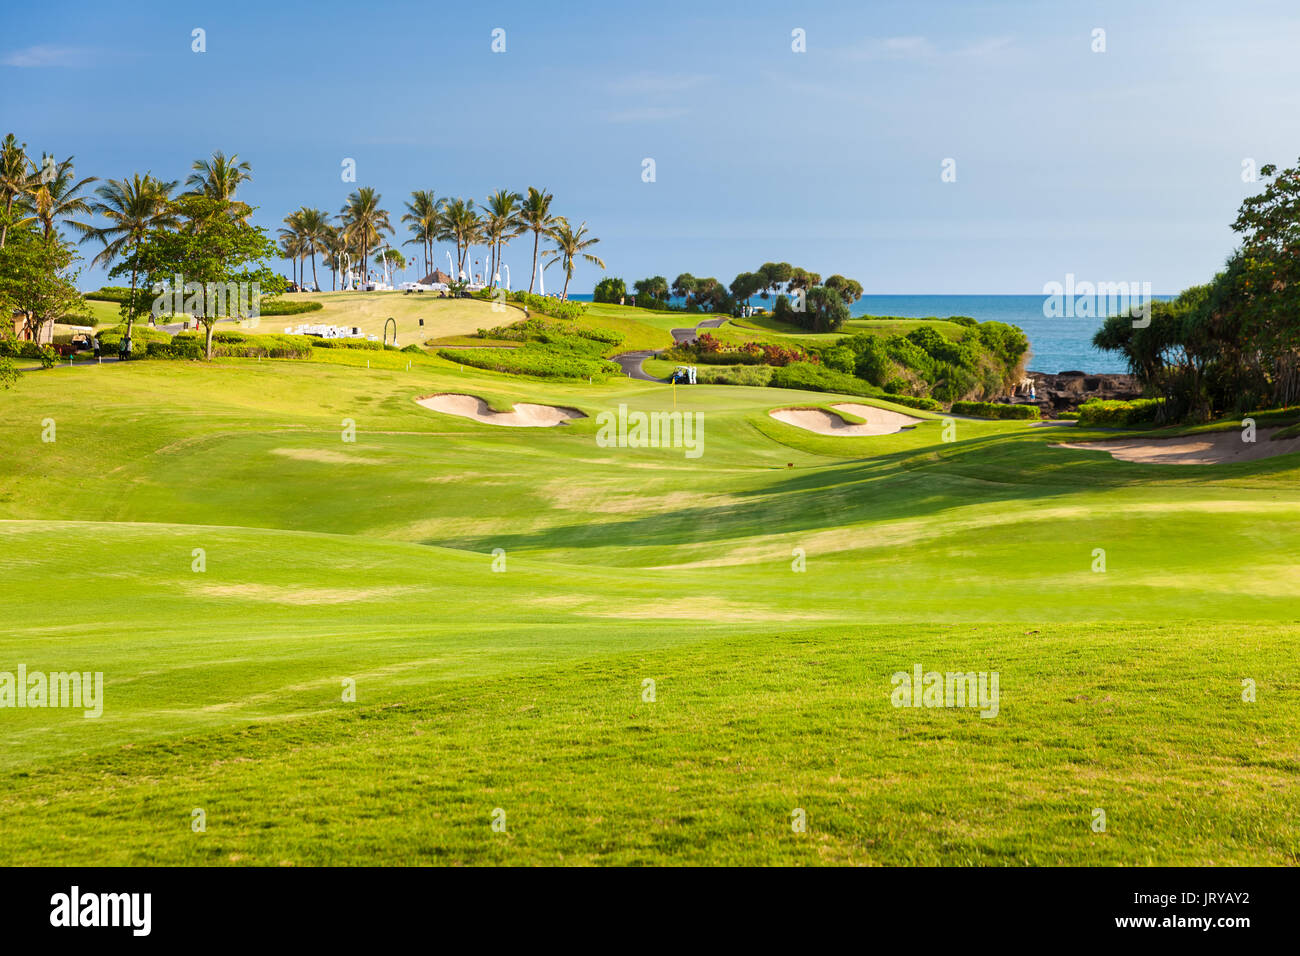 Long Island Golf High Resolution Stock Photography and Images - Alamy